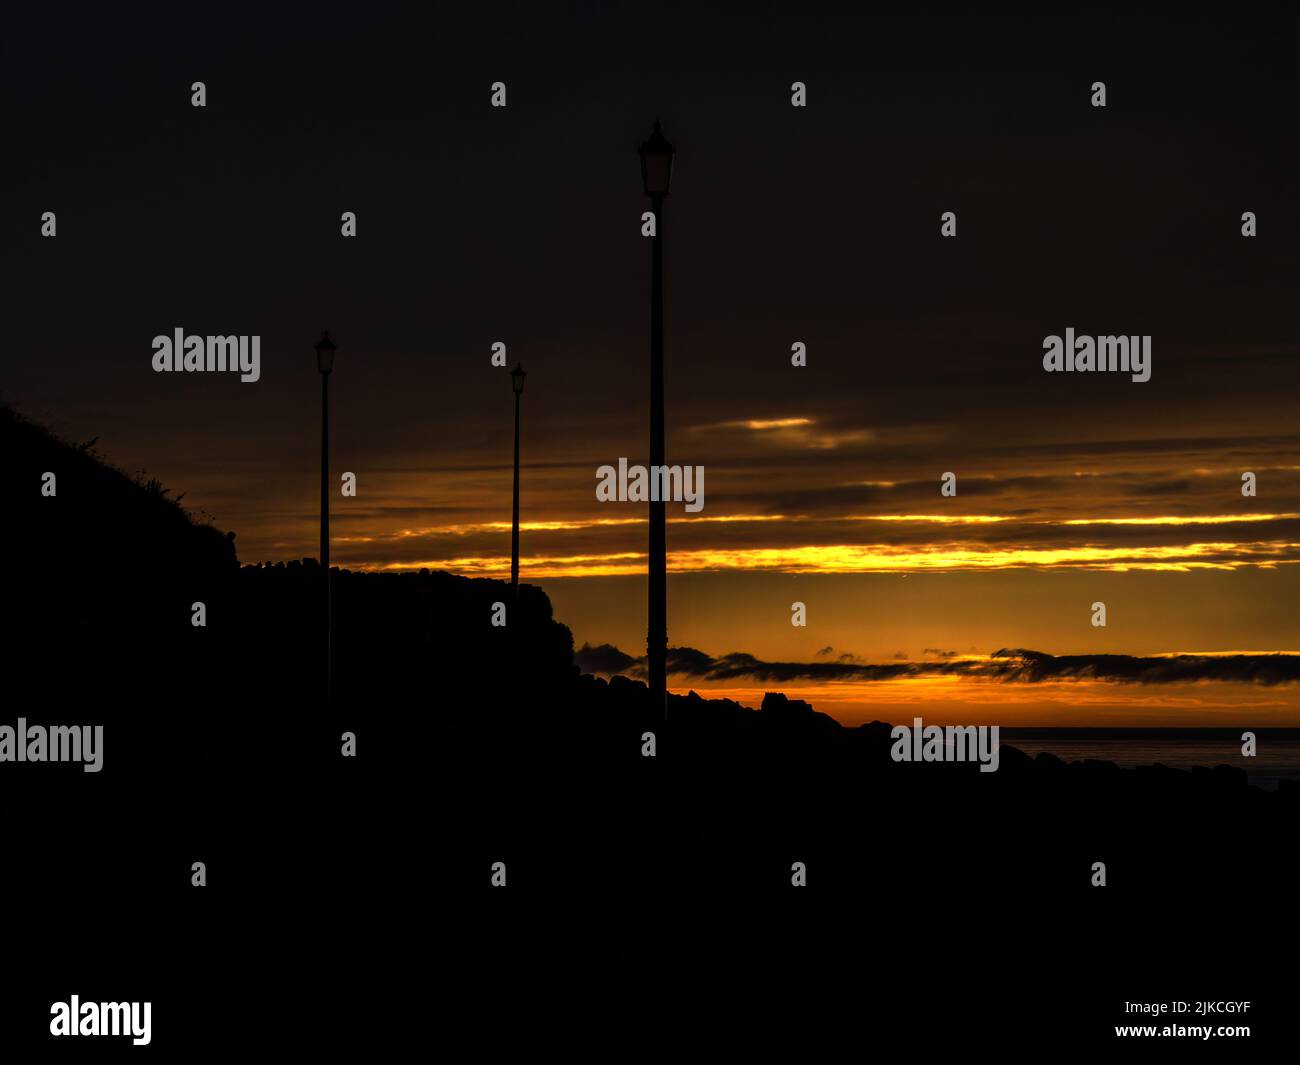 Sunset horizon at coast, with street lamp silhouettes and copyspace. Stock Photo